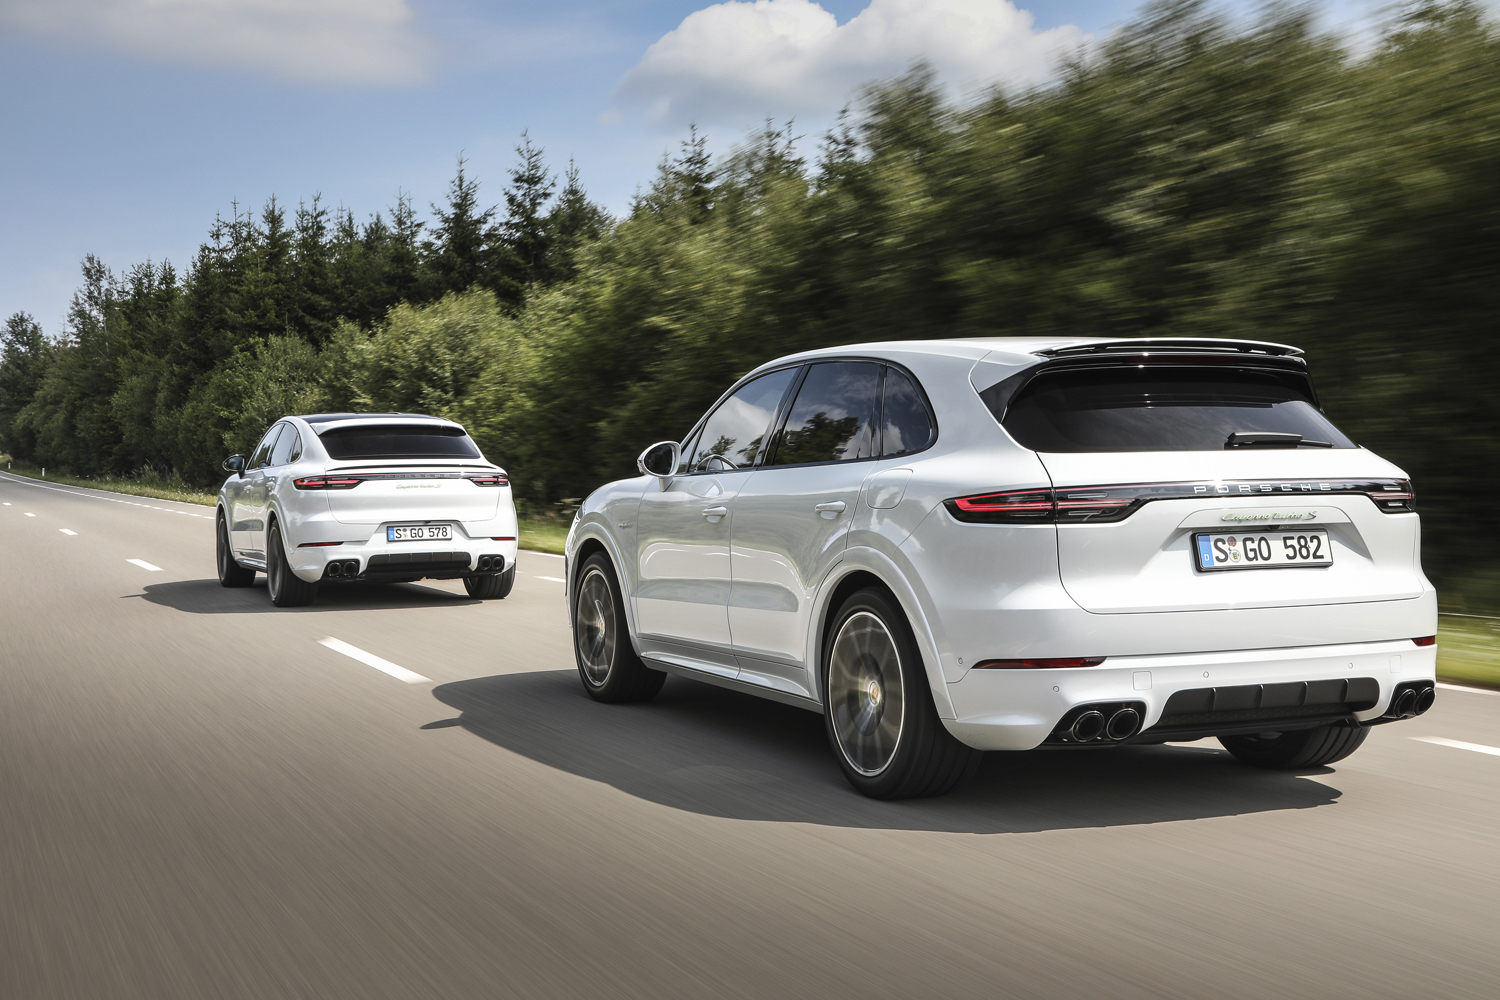 2020 porsche cayenne turbo s e hybrid delivers 670 hp electrified punch tseh 4